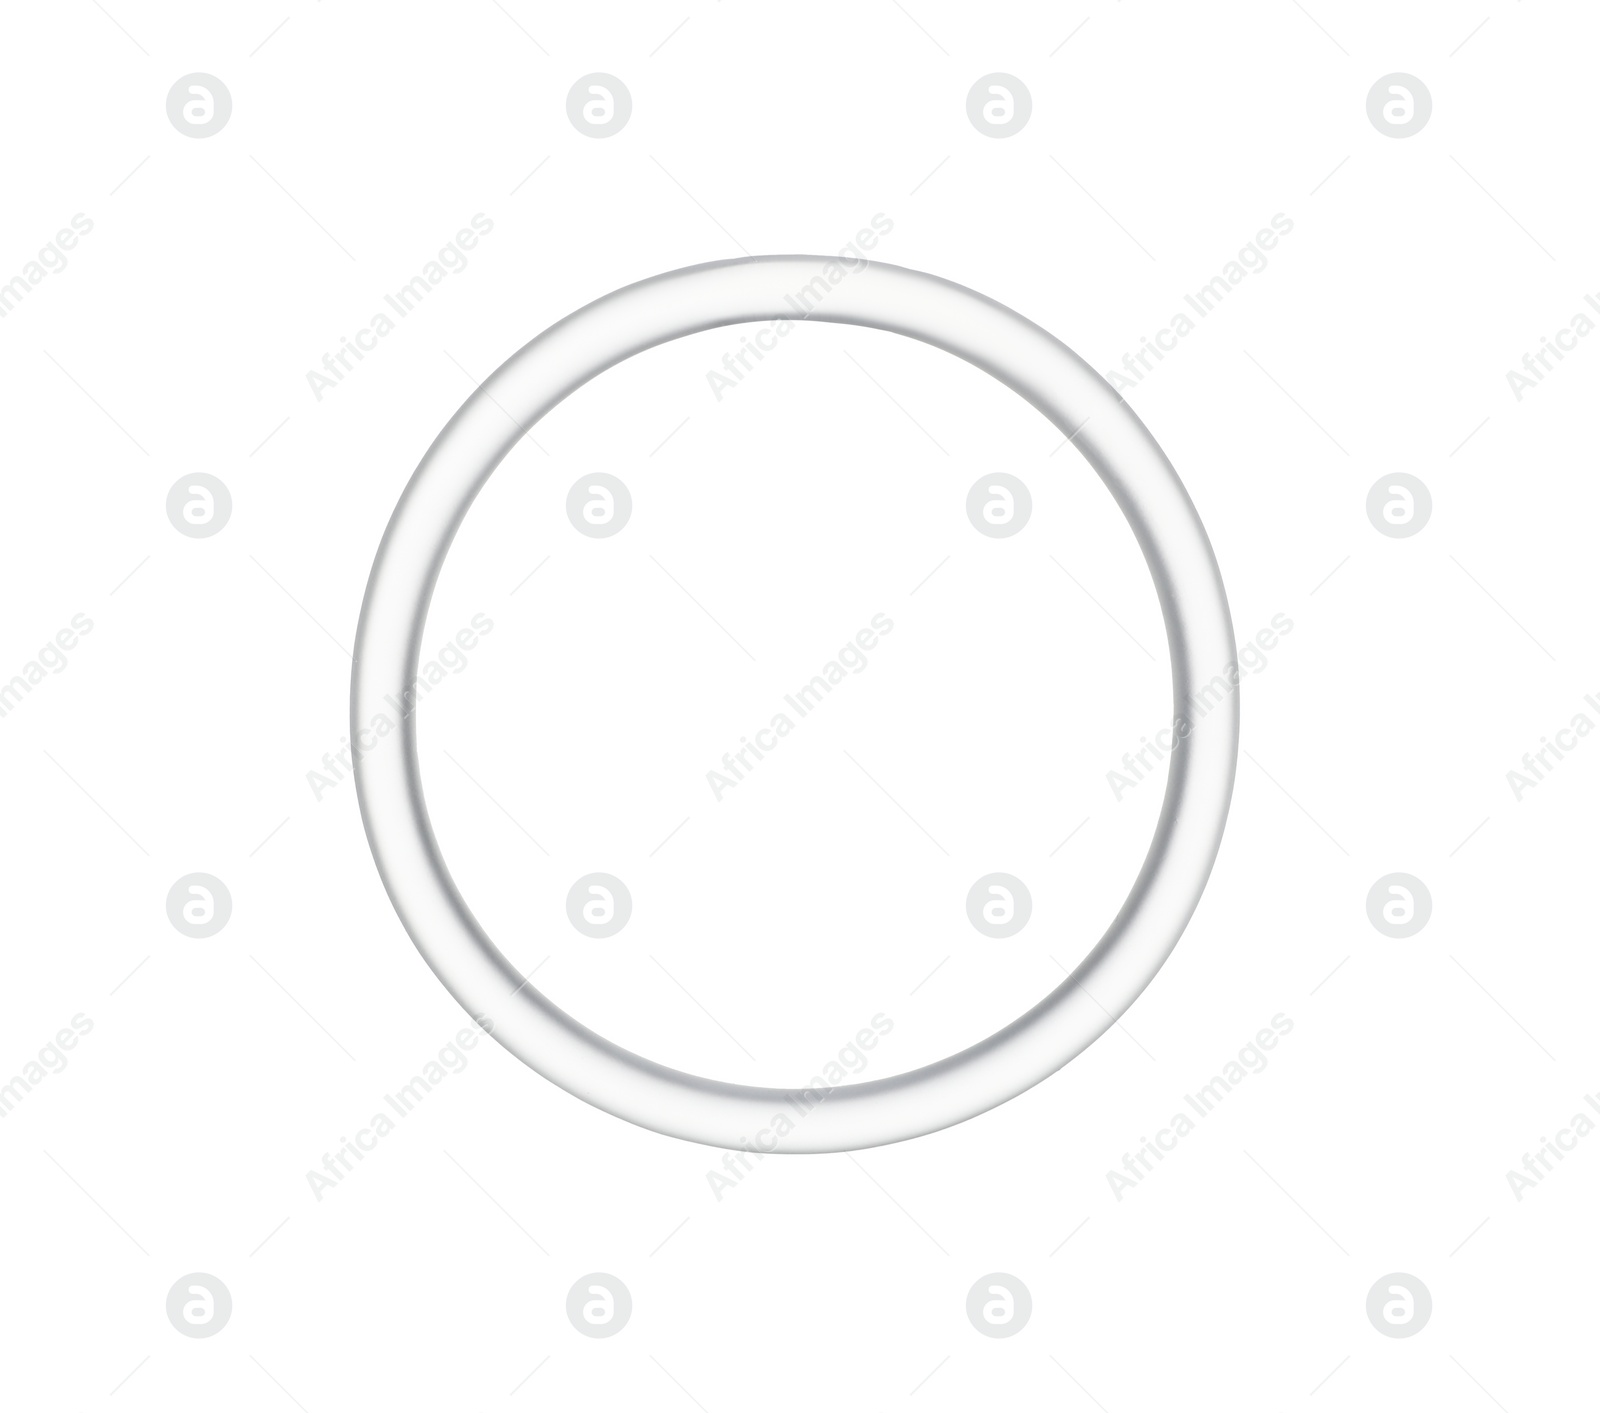 Photo of Diaphragm vaginal contraceptive ring isolated on white, top view